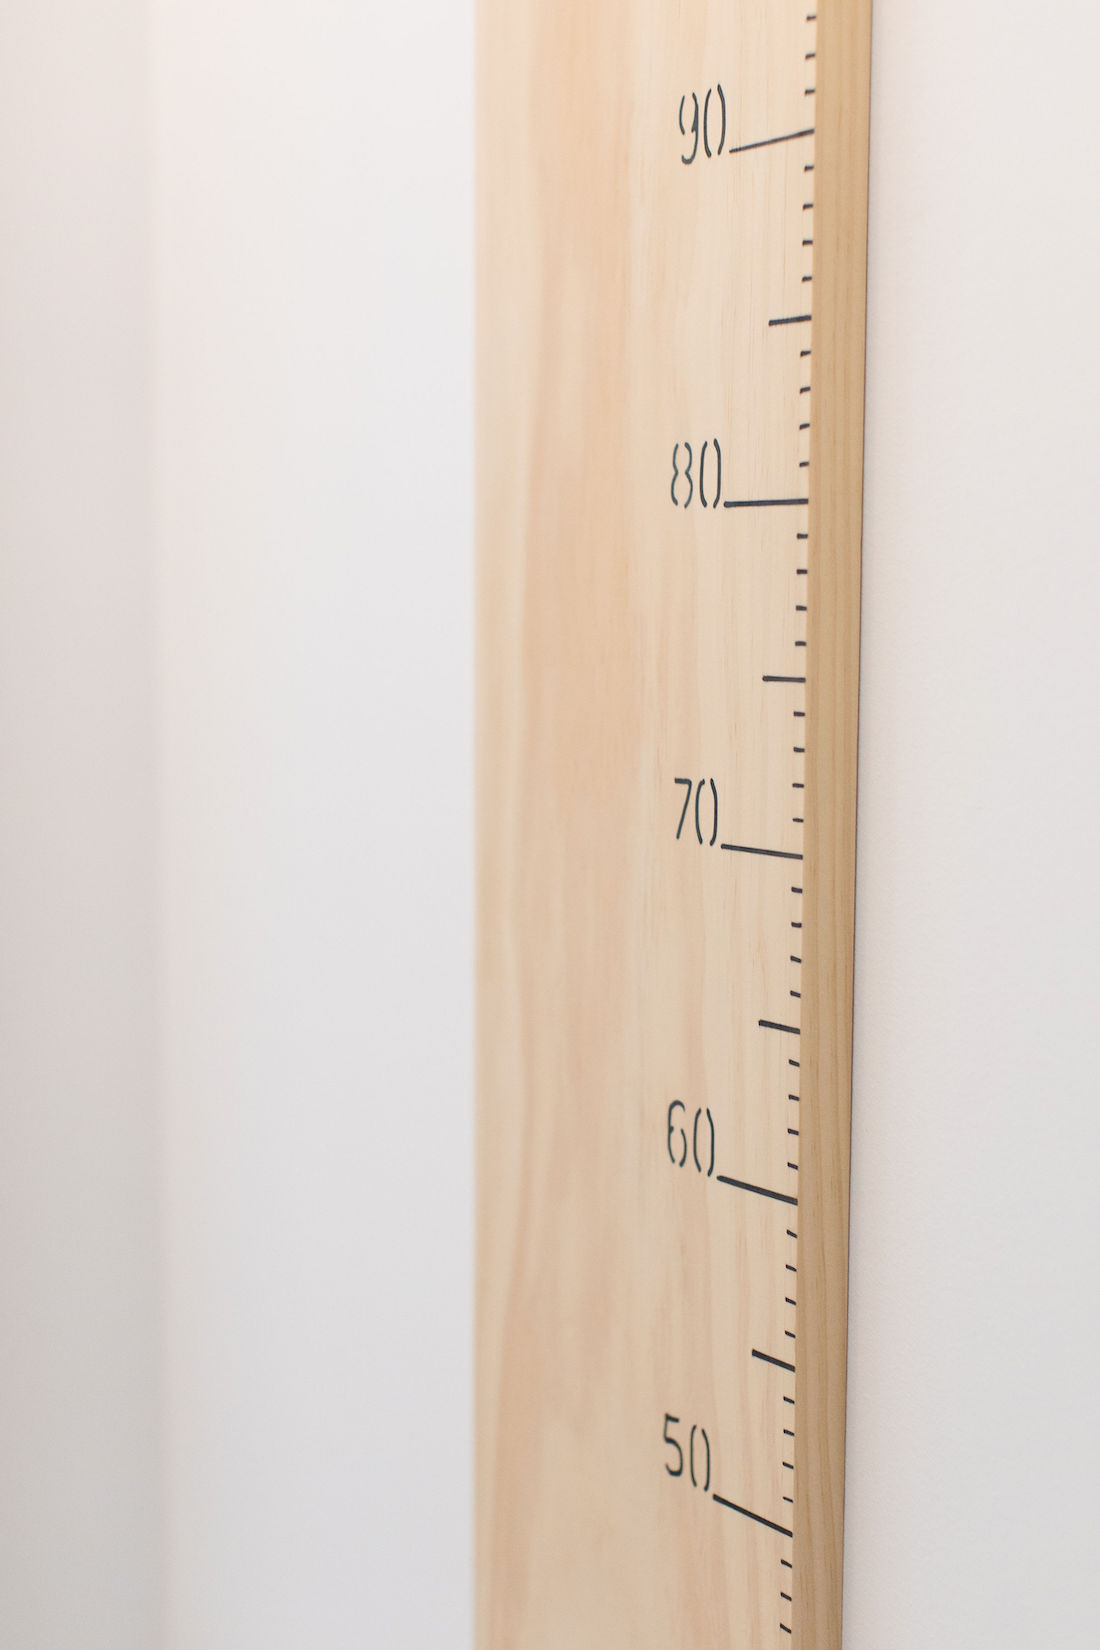 Growth chart details